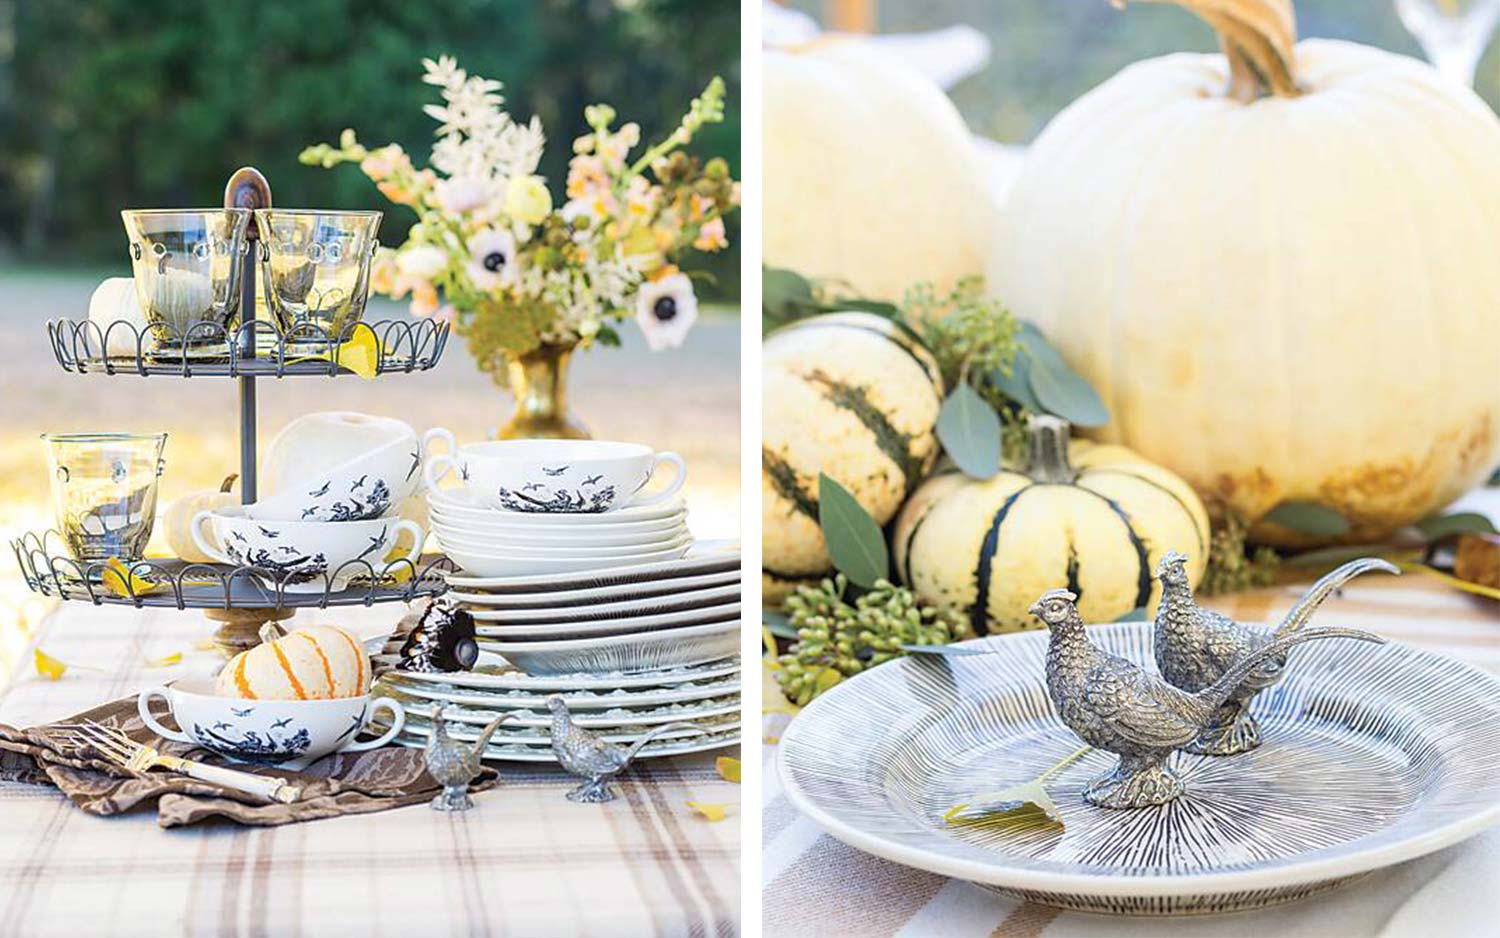 Black-and-white tabletop accessories